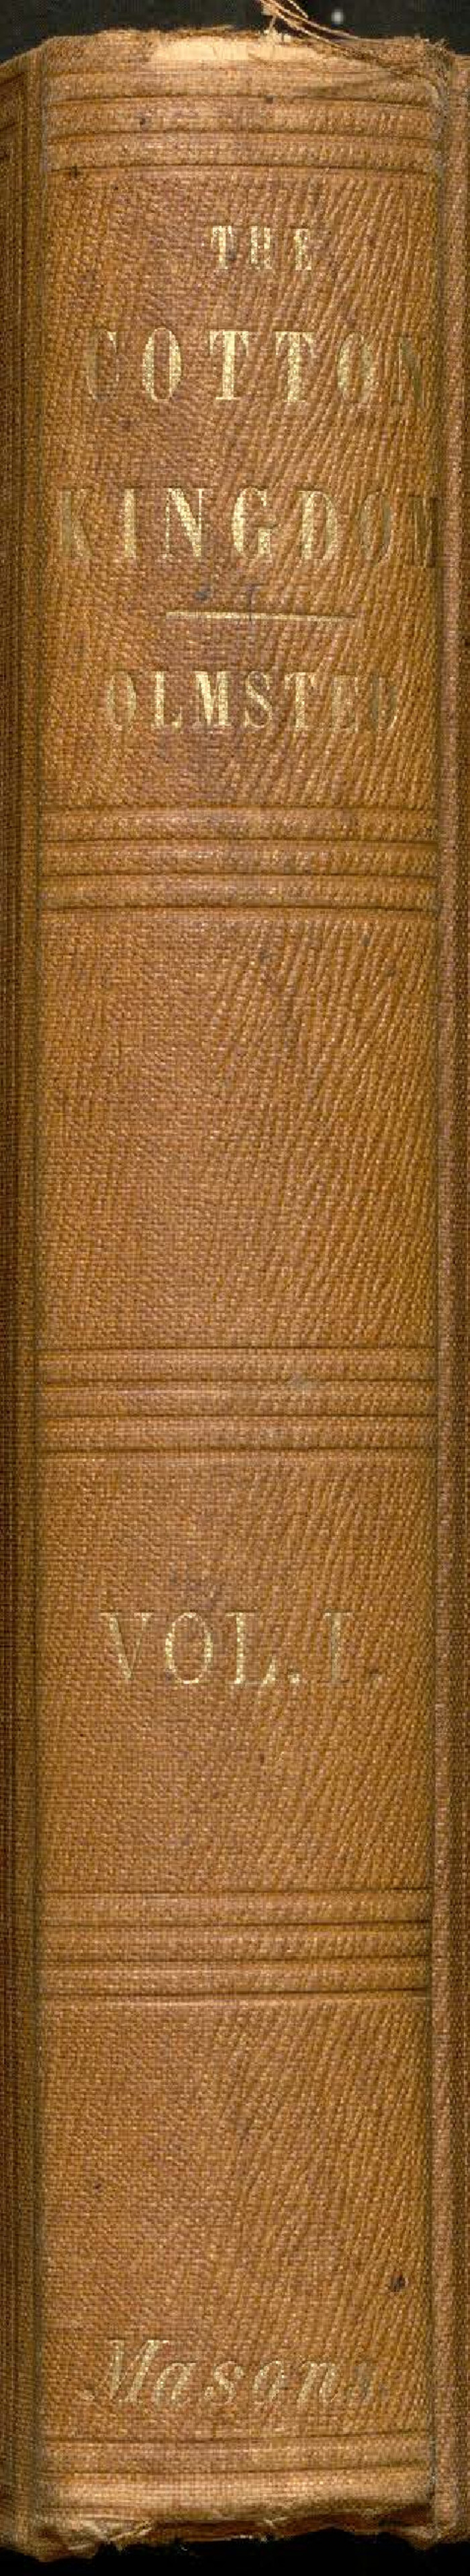 96571, The Cotton Kingdom: a Traveller's Observations on Cotton and Slavery in the American Slave States, General Map Collection (Vol. 1 of 2)